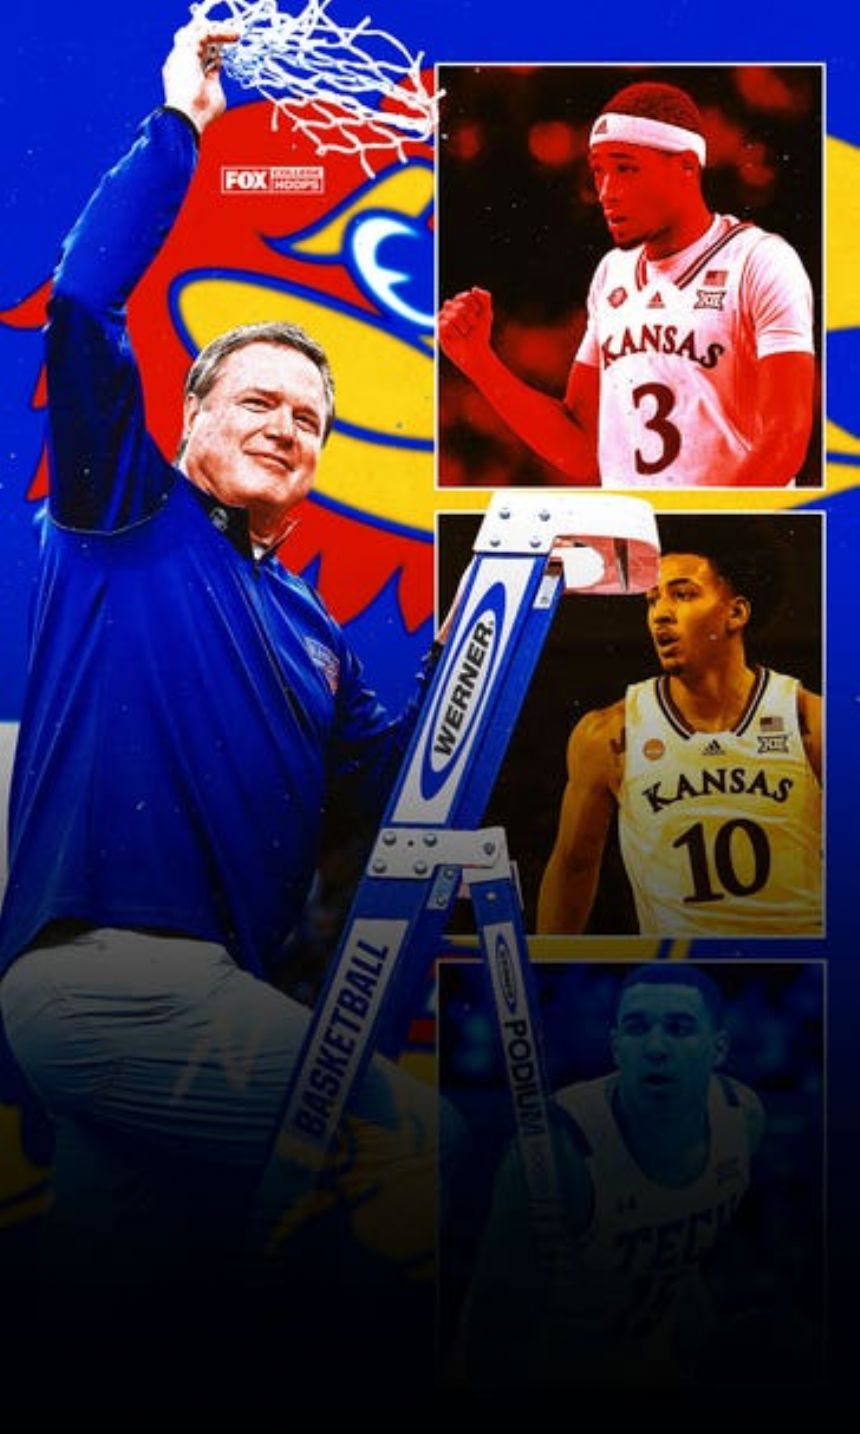 Kansas Jayhawks have work to do following losses to title team